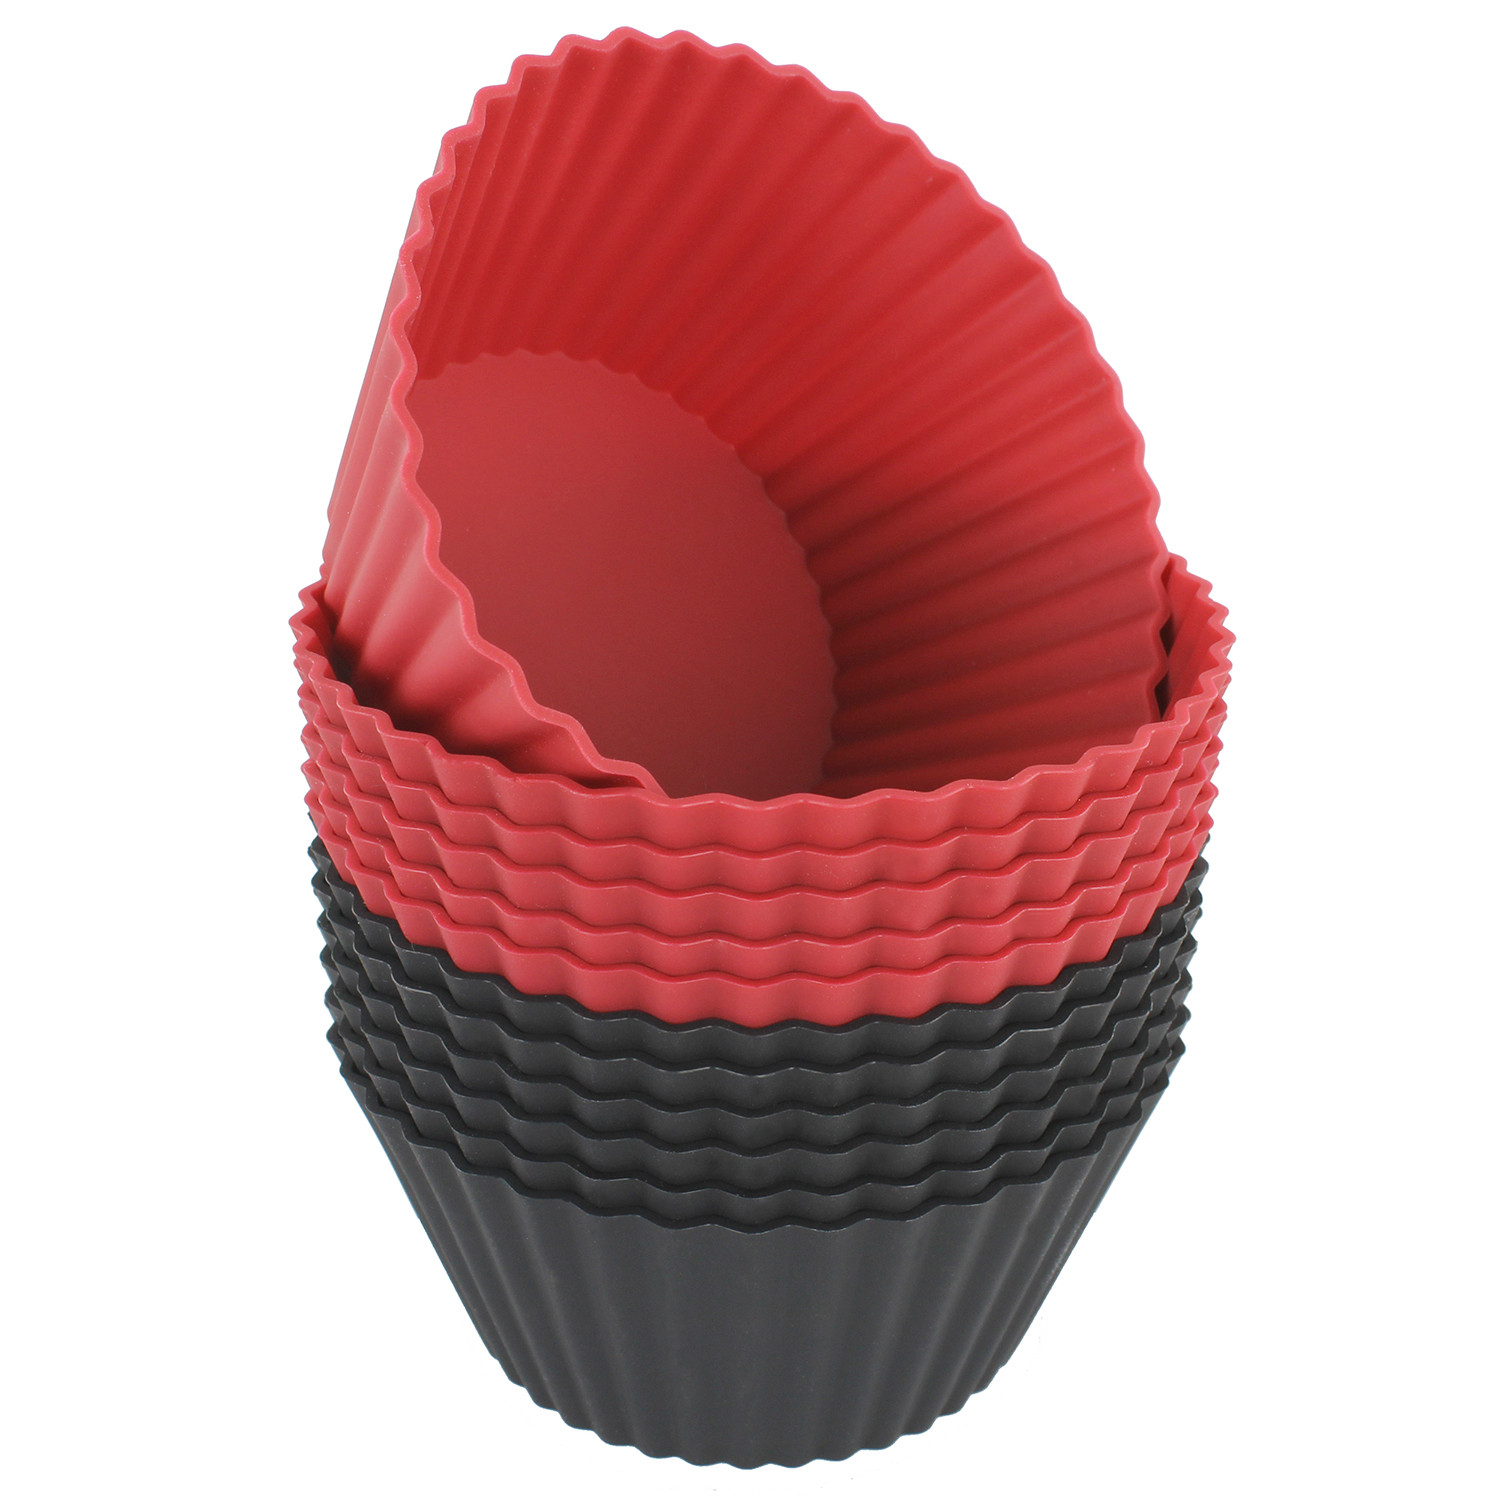 Freshware Silicone Cupcake Liners / Baking Cups - 12-Pack Jumbo Muffin Molds, 3-6/8 inch Round, Red and Black Colors